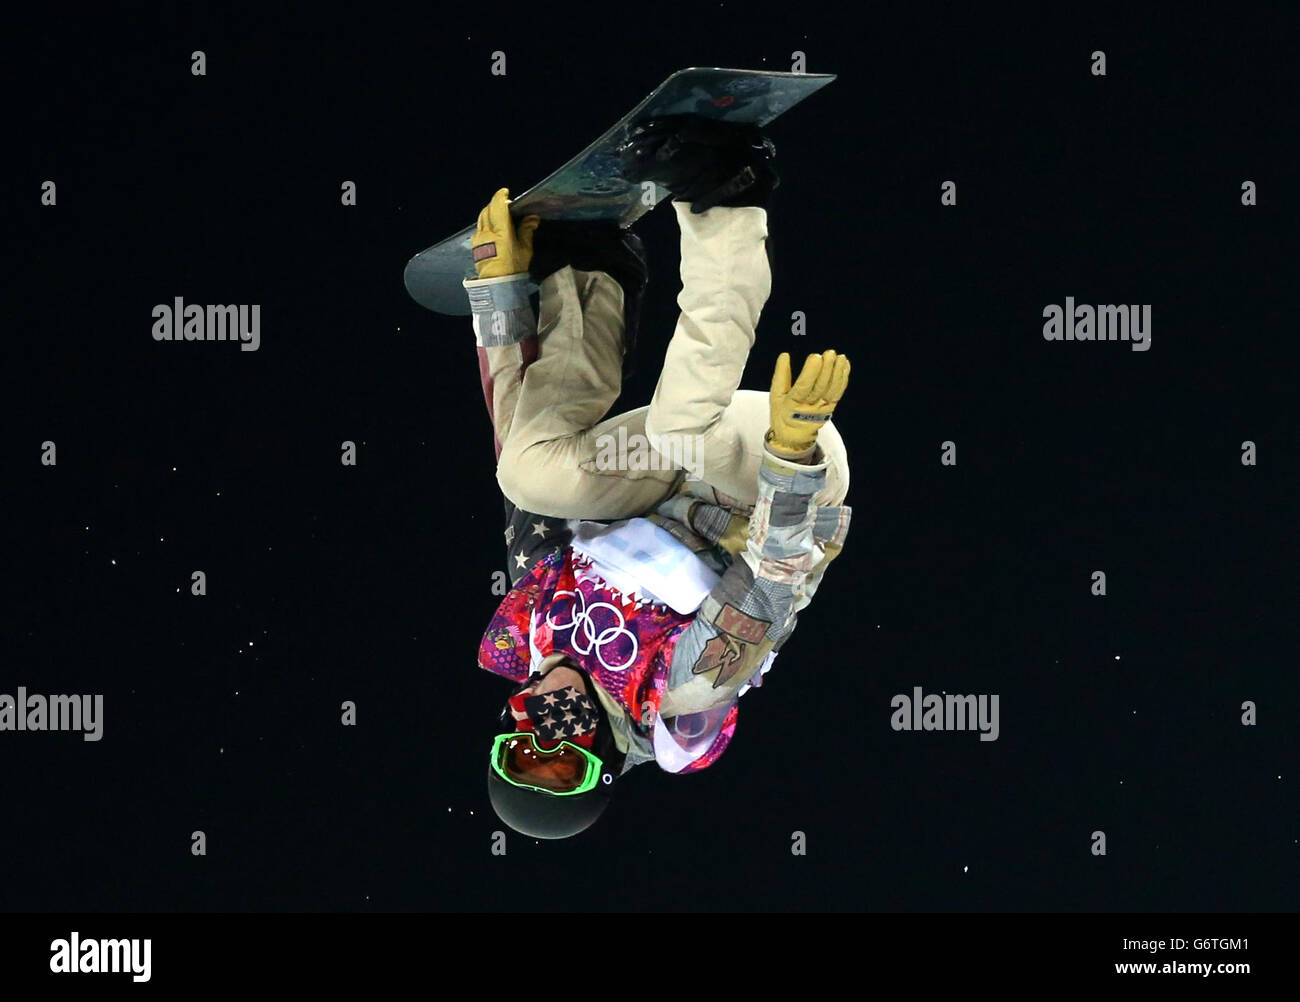 Shaun white snowboarding hi-res stock photography and images - Alamy